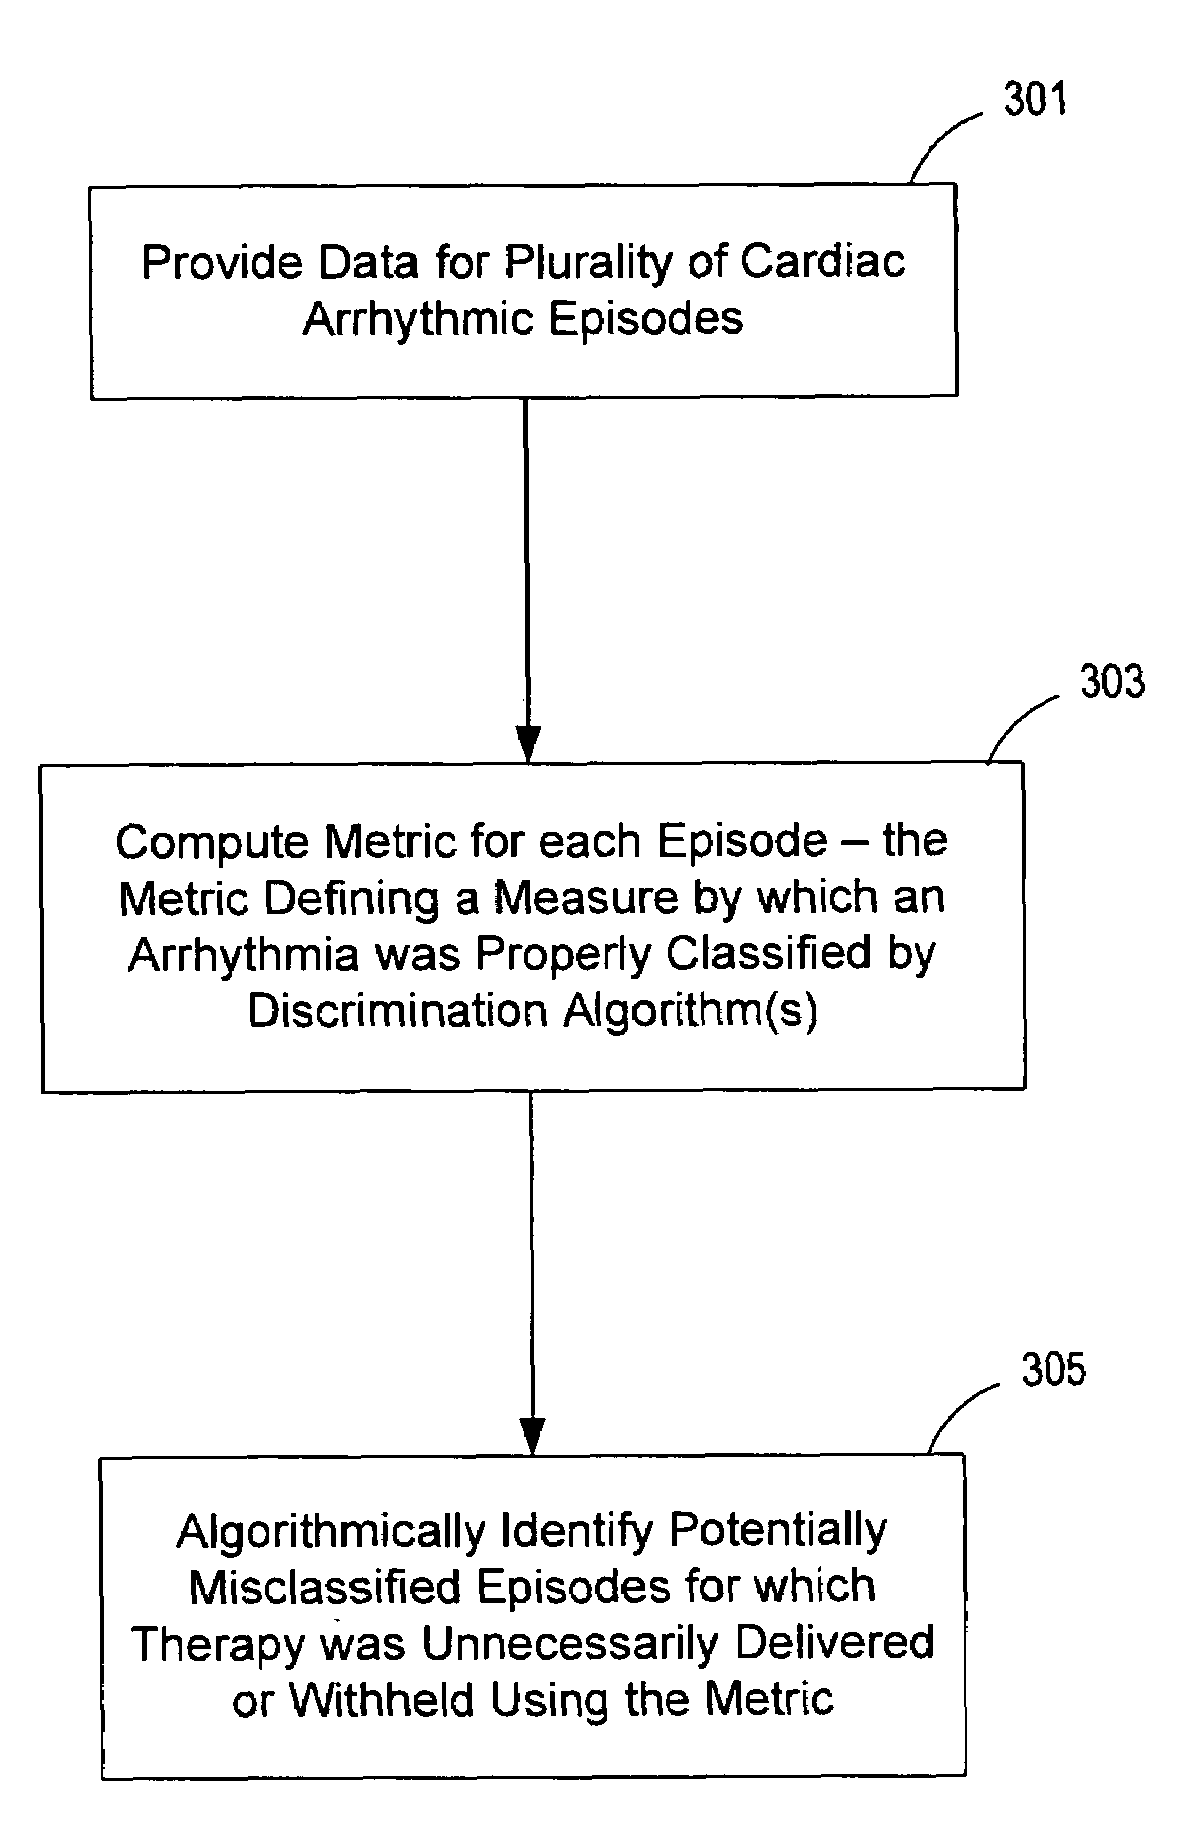 Method and apparatus for identifying potentially misclassified arrhythmic episodes